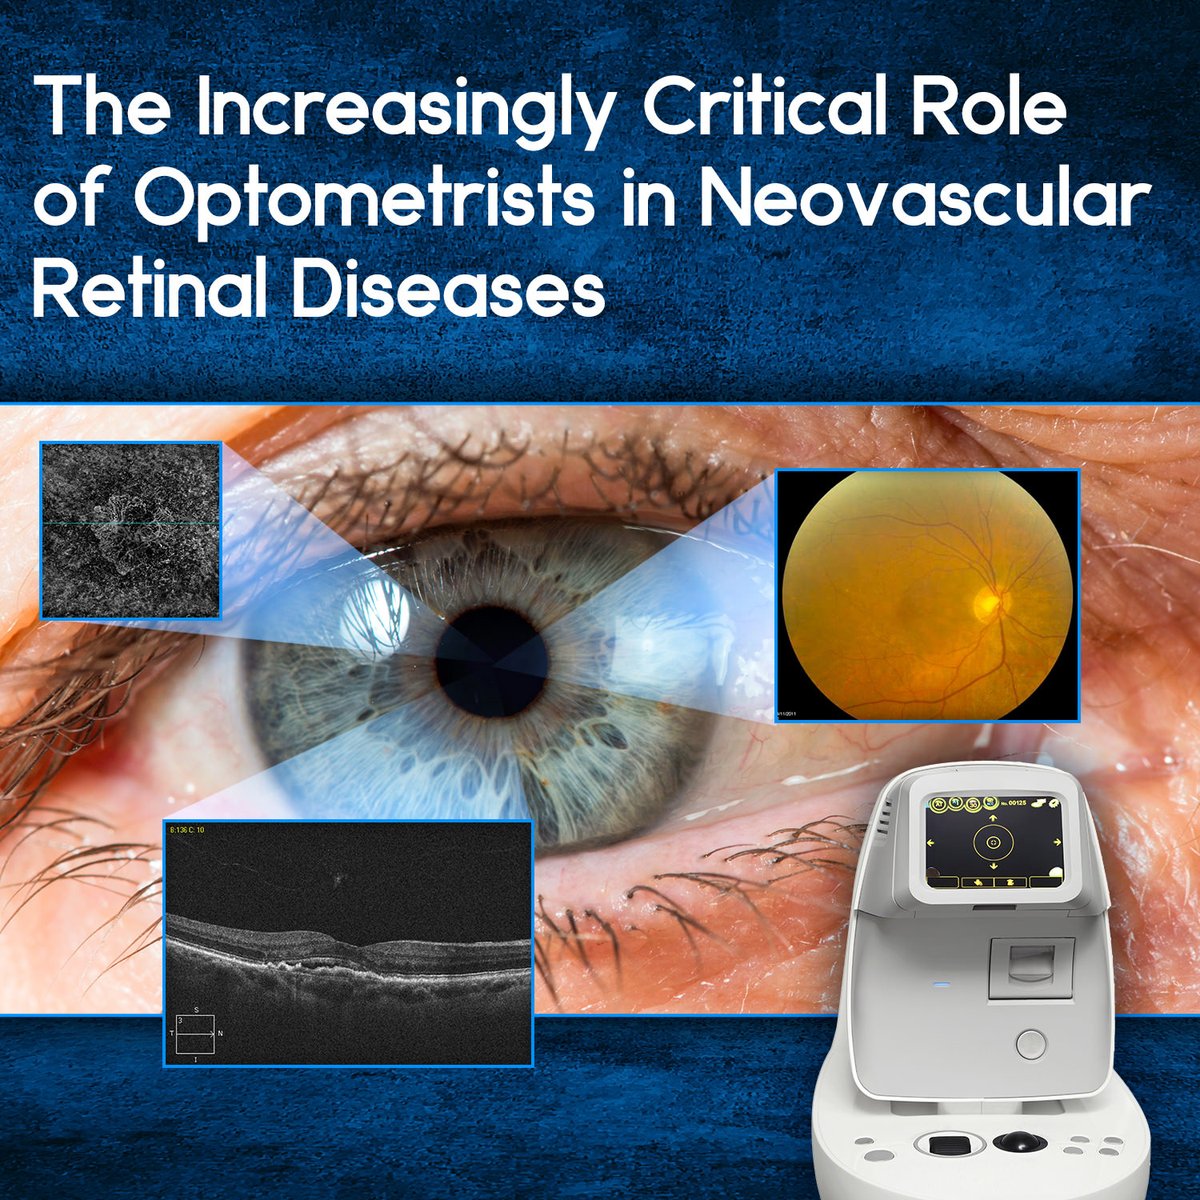 FREE CE: 'The Increasingly Critical Role of Optometrists in Neovascular Retinal Diseases'. 

Go to paradigmmc.com/1201 

#CME #CMEMedicalEducation #FREECE #ContinuingMedicalEducation #CEOptometry